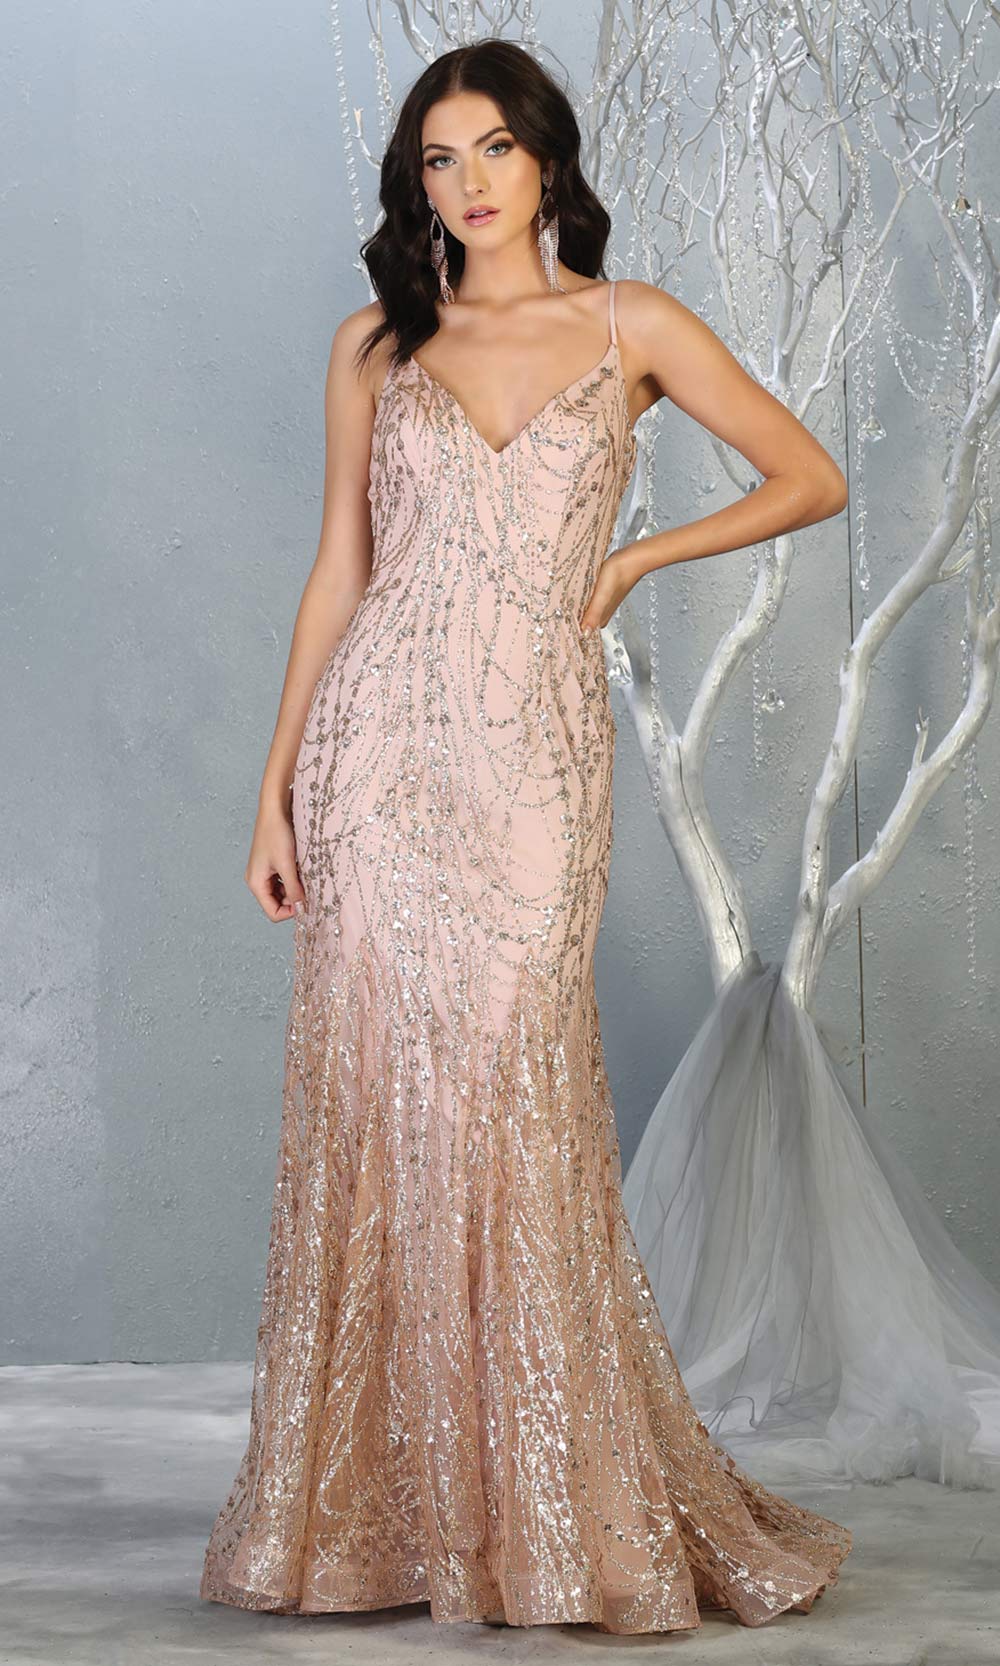 Mayqueen RQ7814 long rose gold v neck sexy fitted sequin dress w/straps. Full length rose gold gown is perfect for  enagagement/e-shoot dress, formal wedding guest, indowestern gown, evening party dress, prom, bridesmaid. Plus sizes avail.jpg